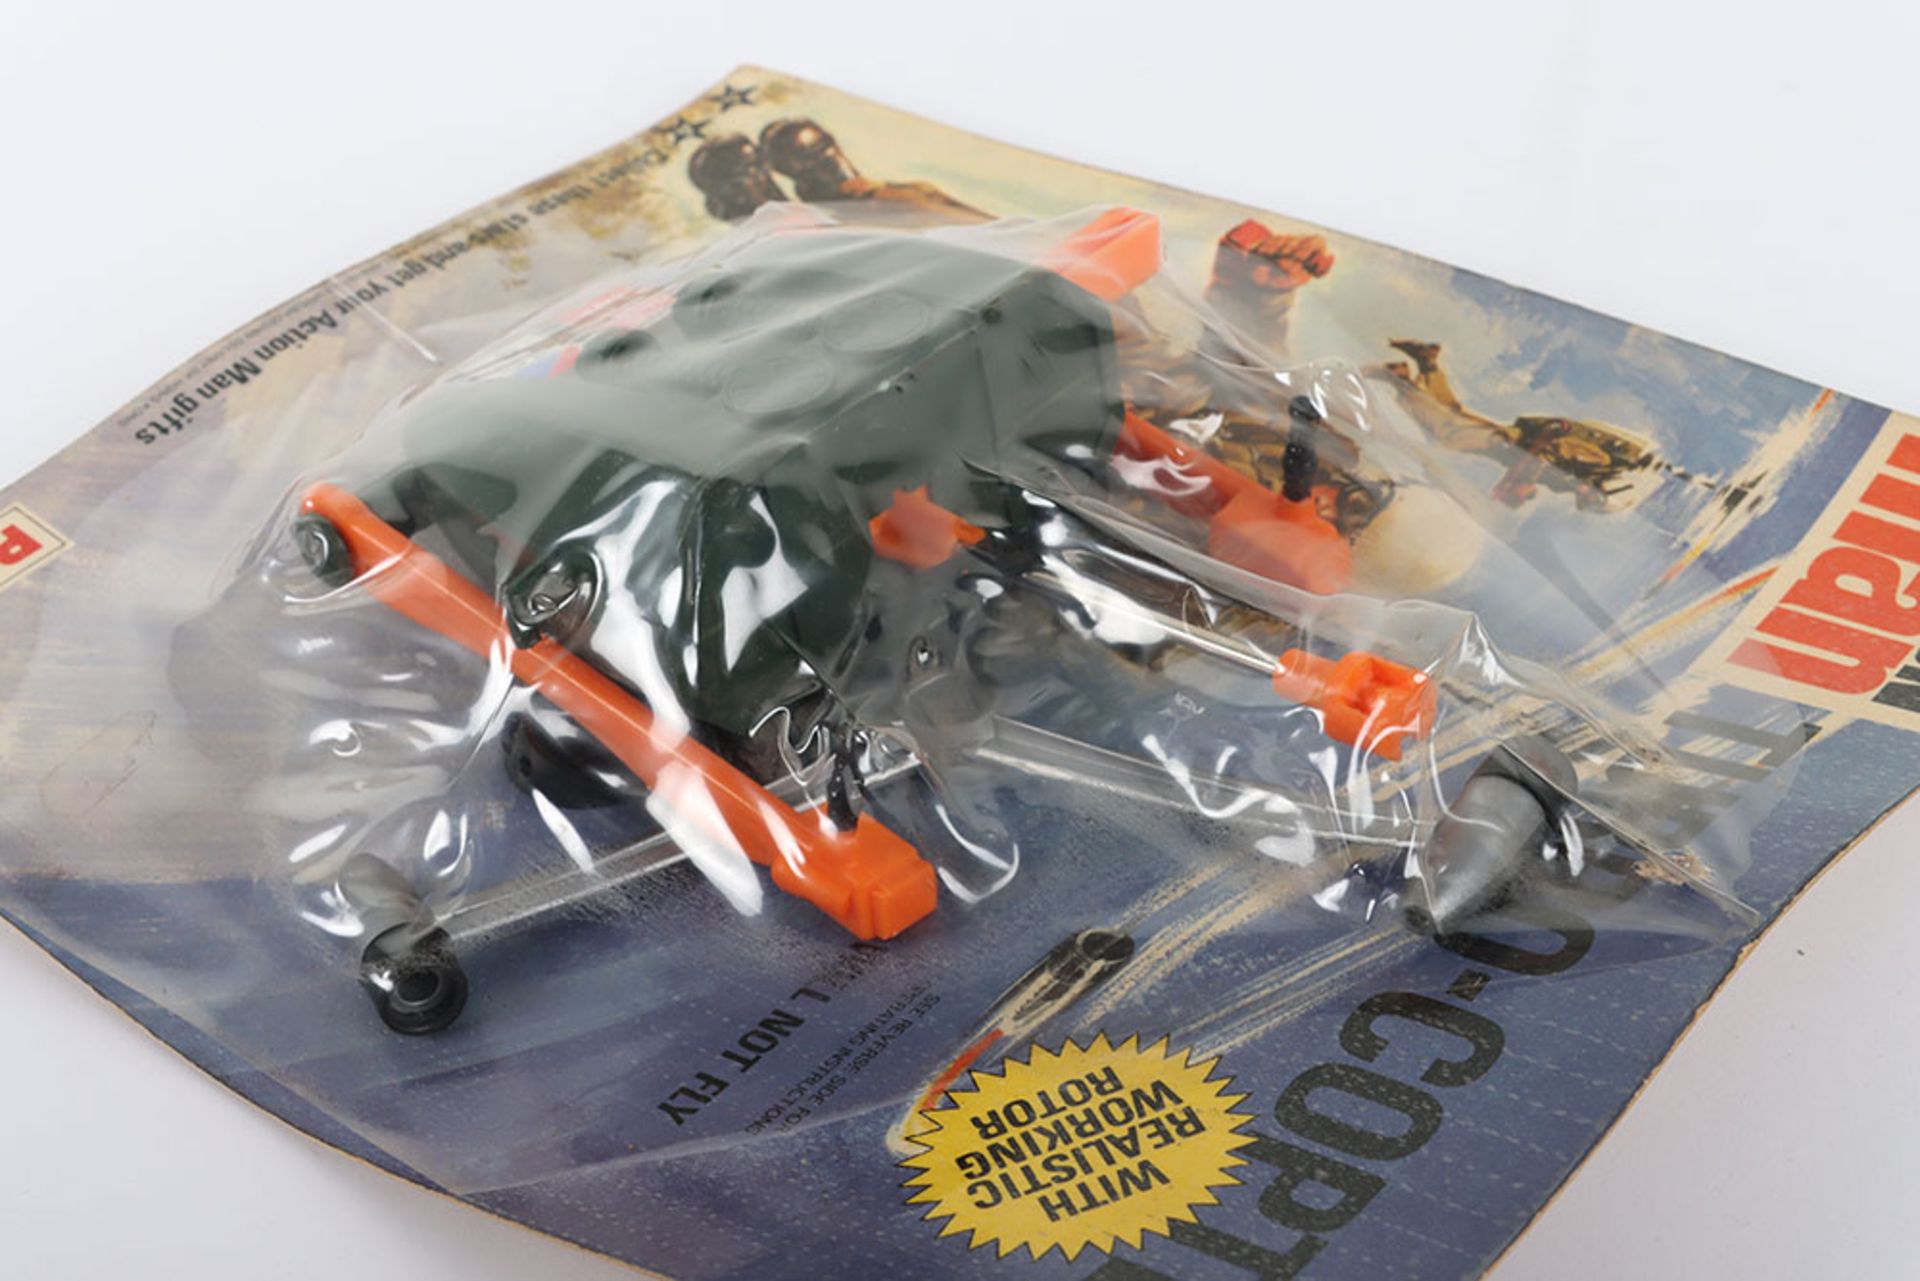 Palitoy Action Man Turbo-Copter - Image 3 of 4